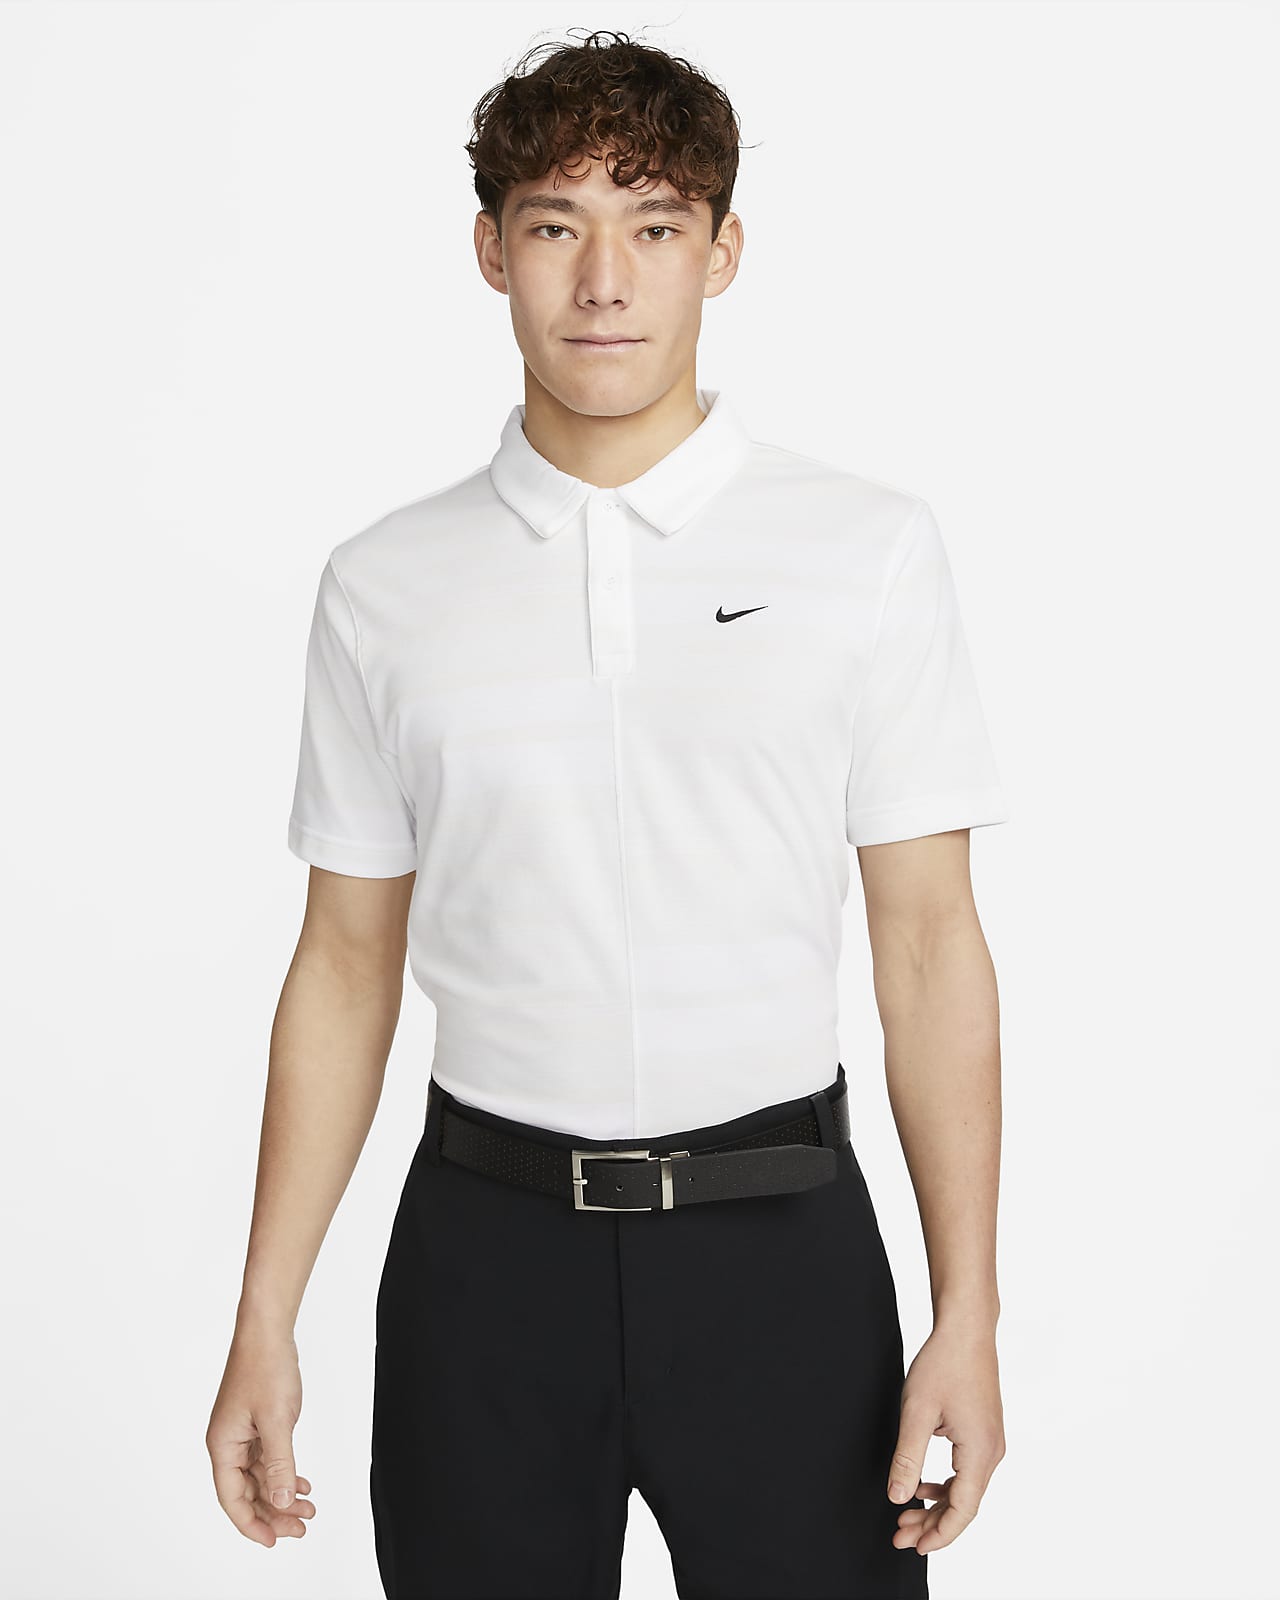 diep kubus gerucht Nike Dri-FIT Unscripted Men's Golf Polo. Nike ID